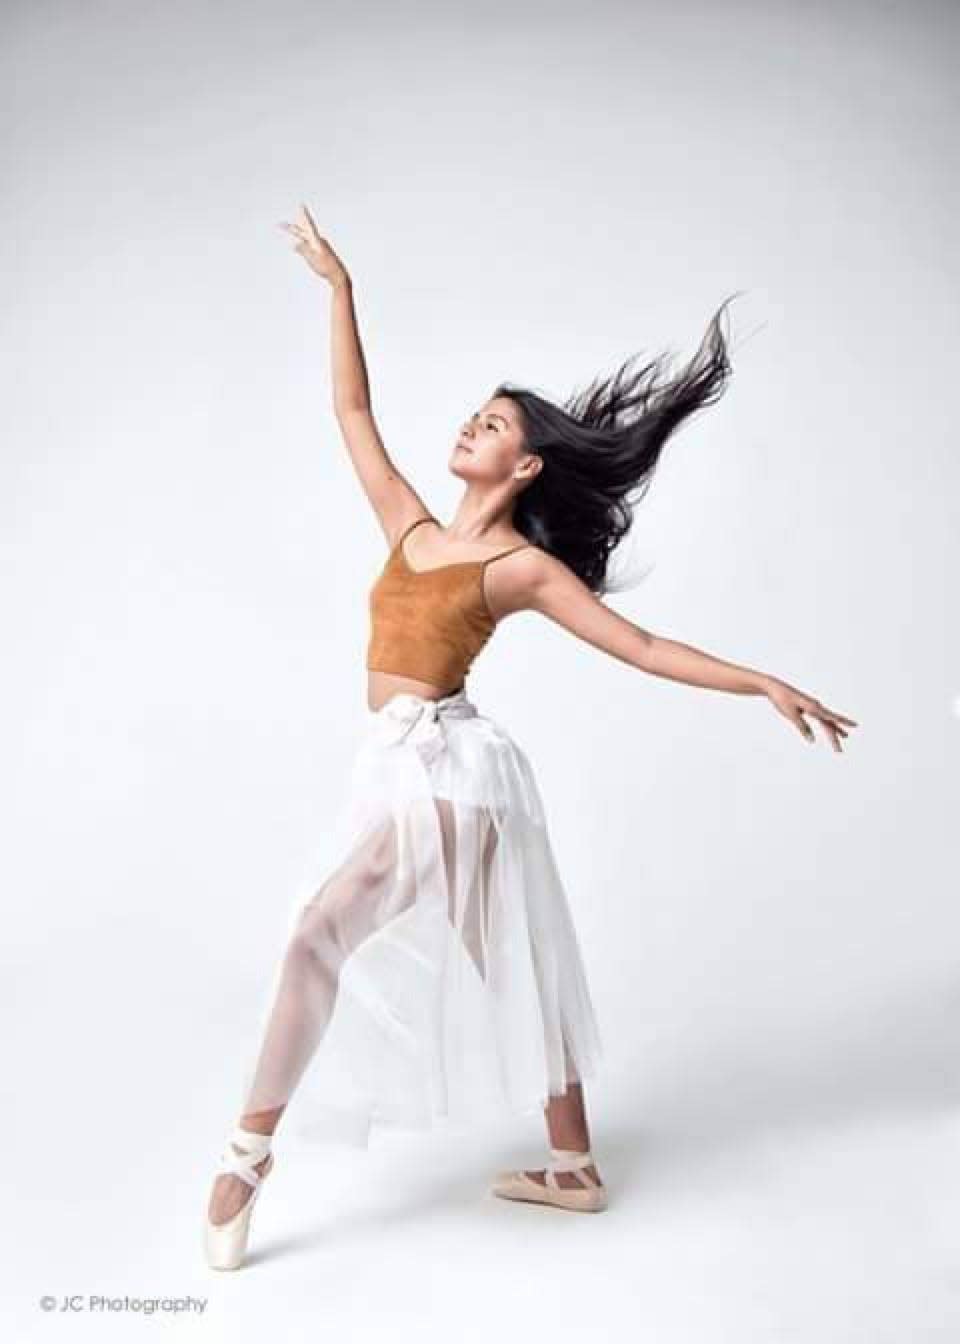 Guatemala native Fernanda Castillo had ambitions of becoming a professional ballet dancer. During the pandemic, her mother could no longer afford her tuition at A&A Ballet Co., in Chicago. After setting up a dance studio for children at Hope Place, a Daytona Beach family shelter, Castillo will graduate from Daytona State College on Tuesday.